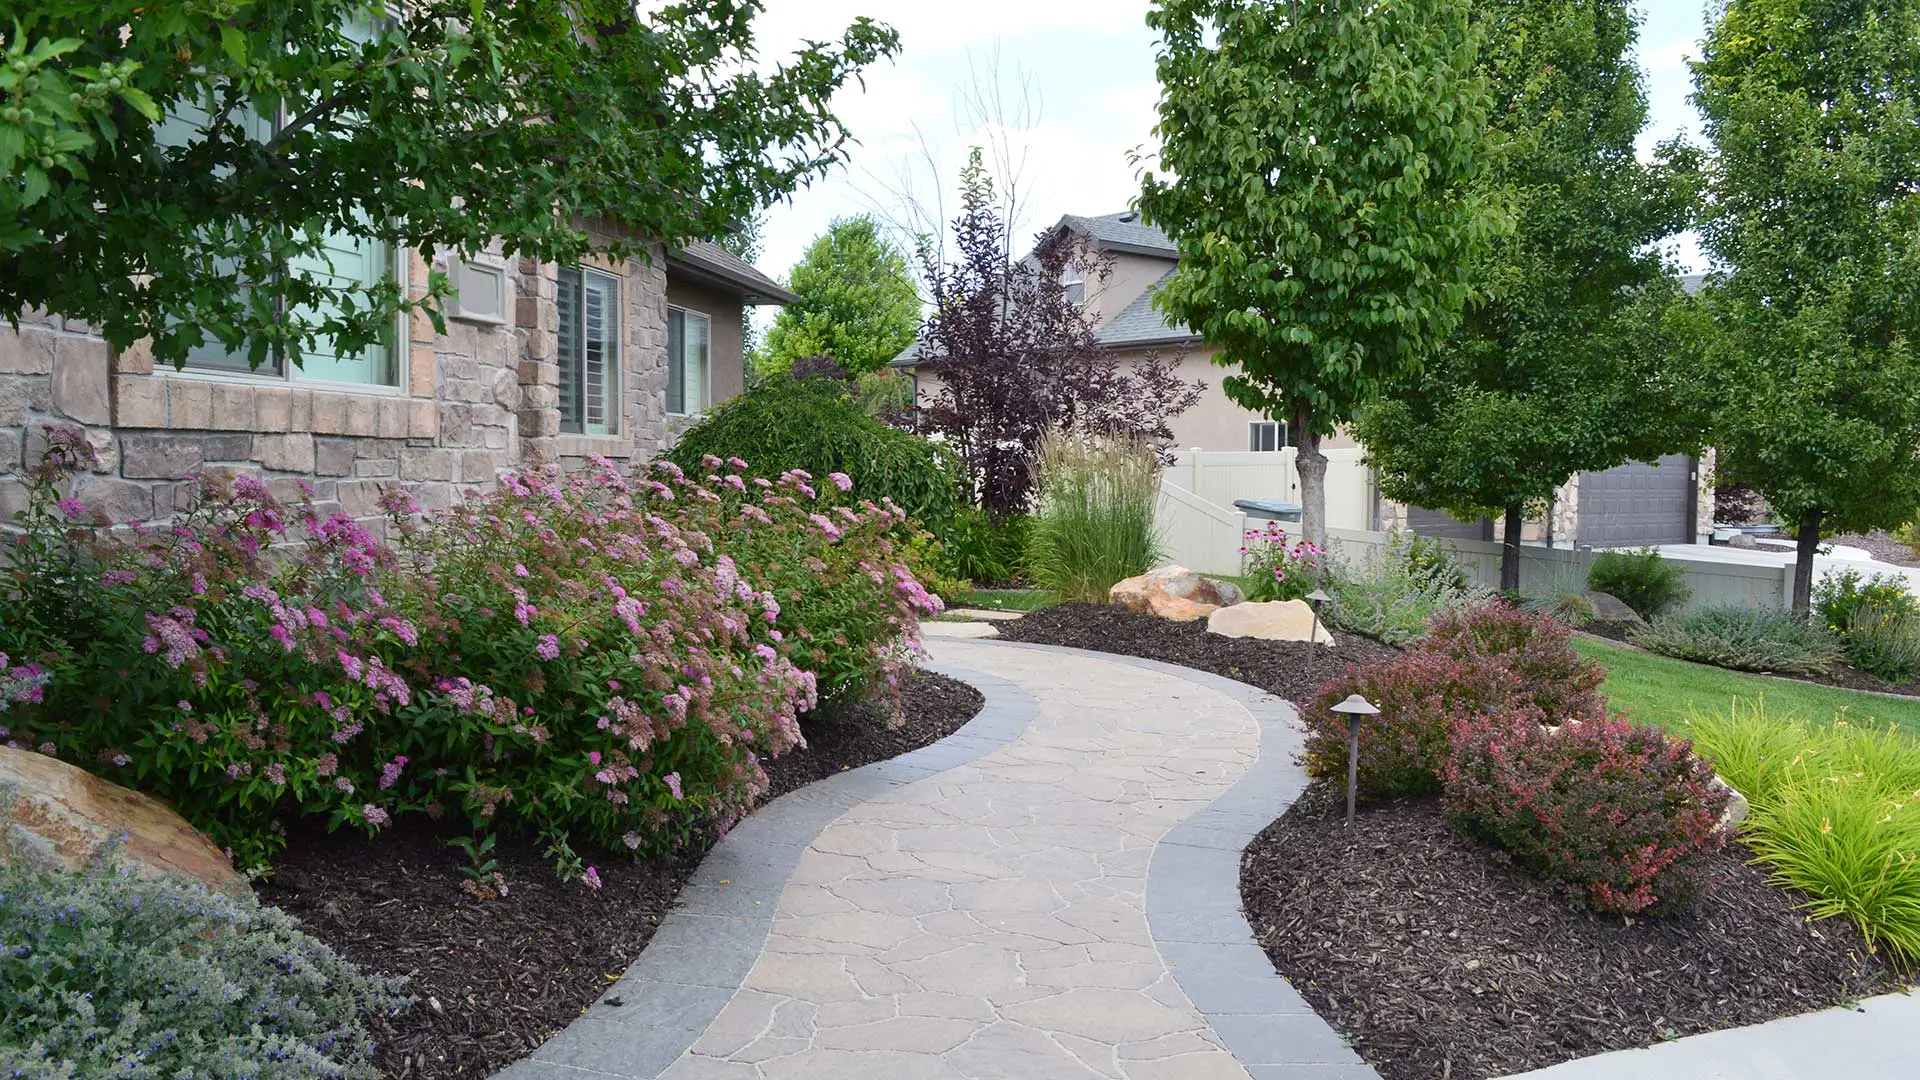 Professionally designed landscaping with mature annuals in front of a home in Salt Lake City, UT.